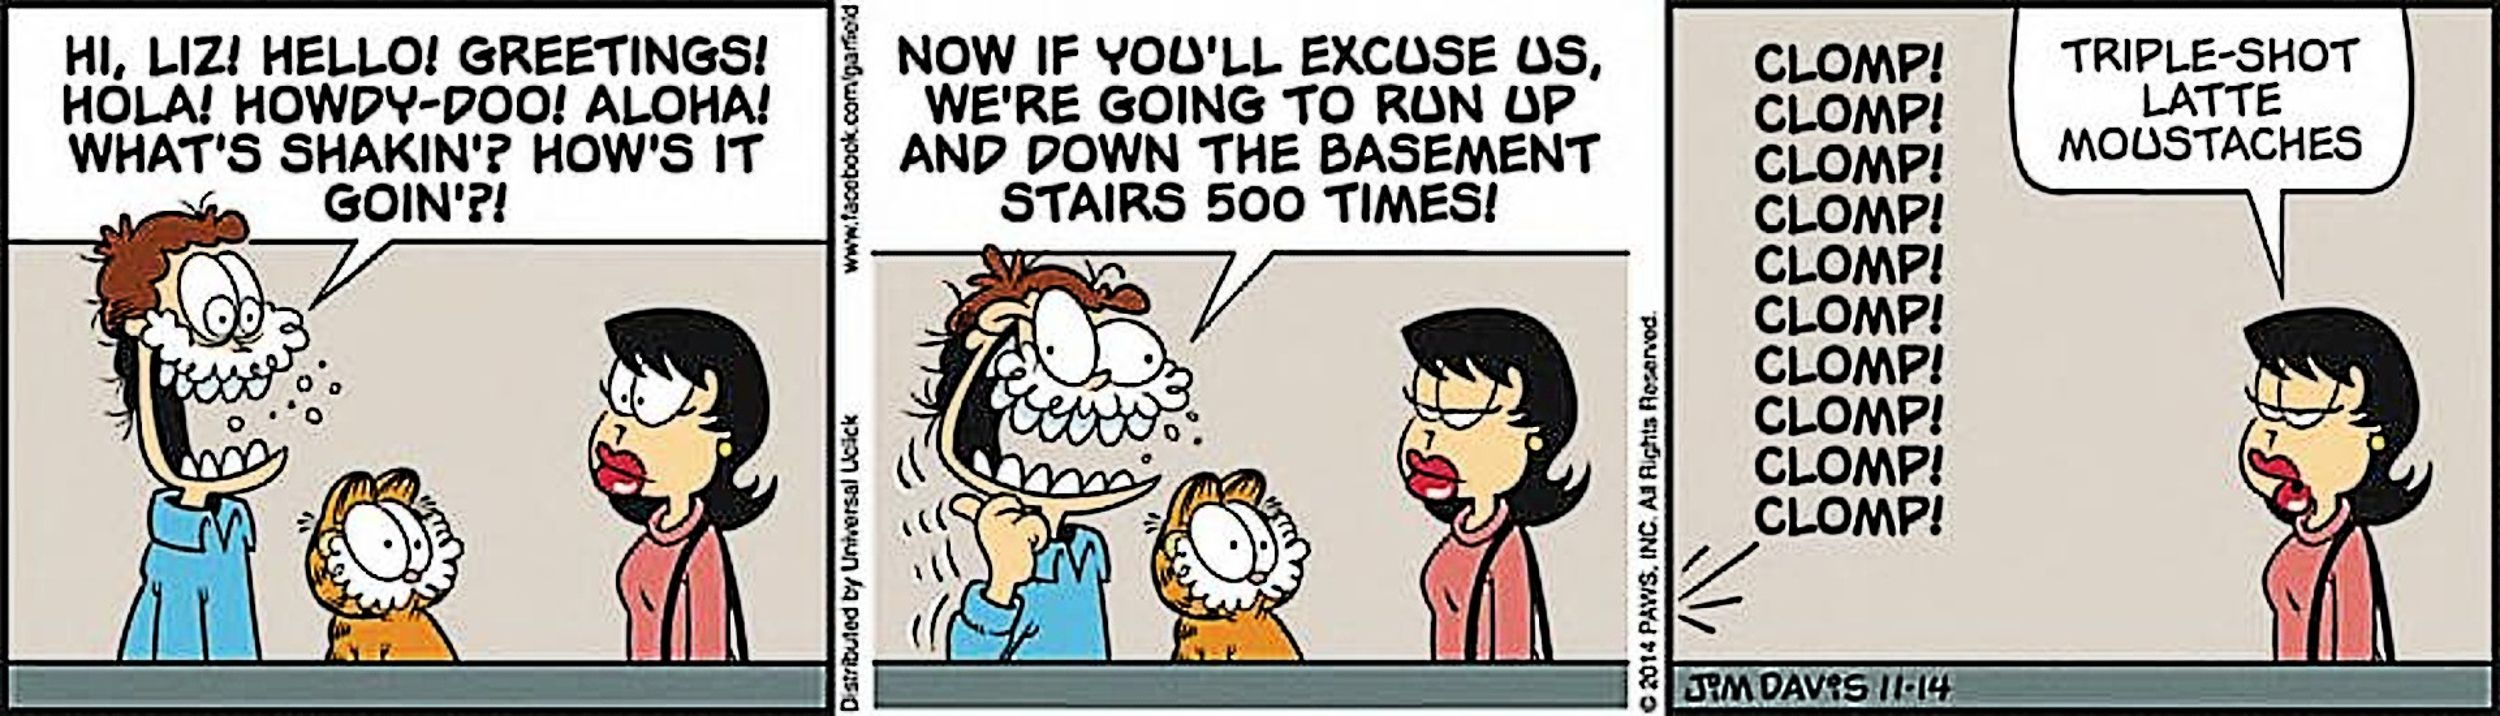 Jon Arbuckle is out of his mind on a triple espresso